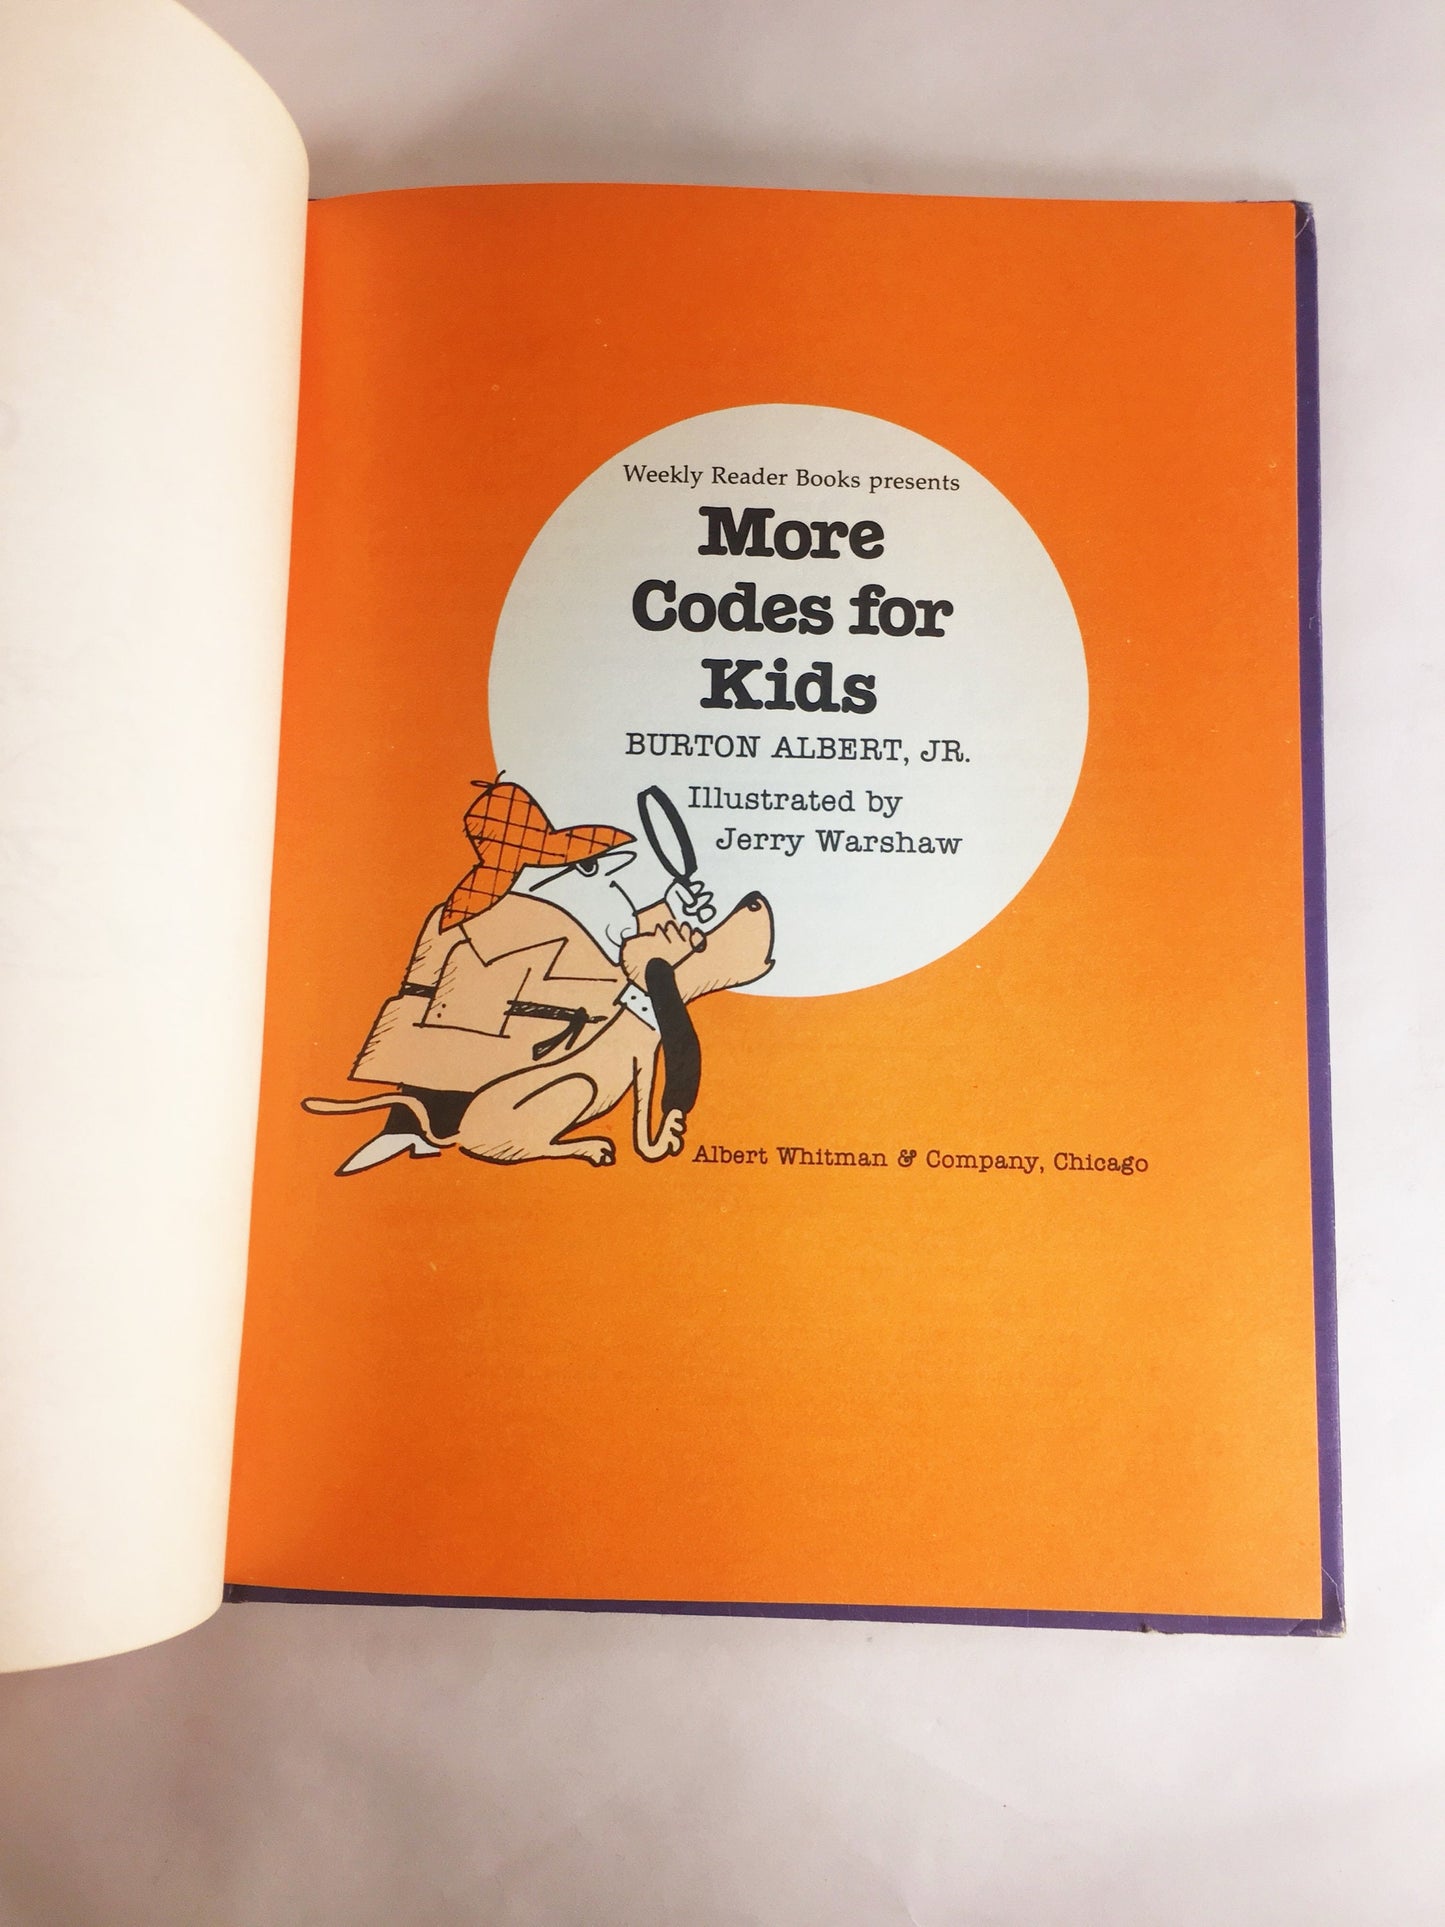 Codes for Kids. Vintage book by Burton Albert circa 1979 about encoding secret messages through code wheels, inks & languages. Weekly Reader